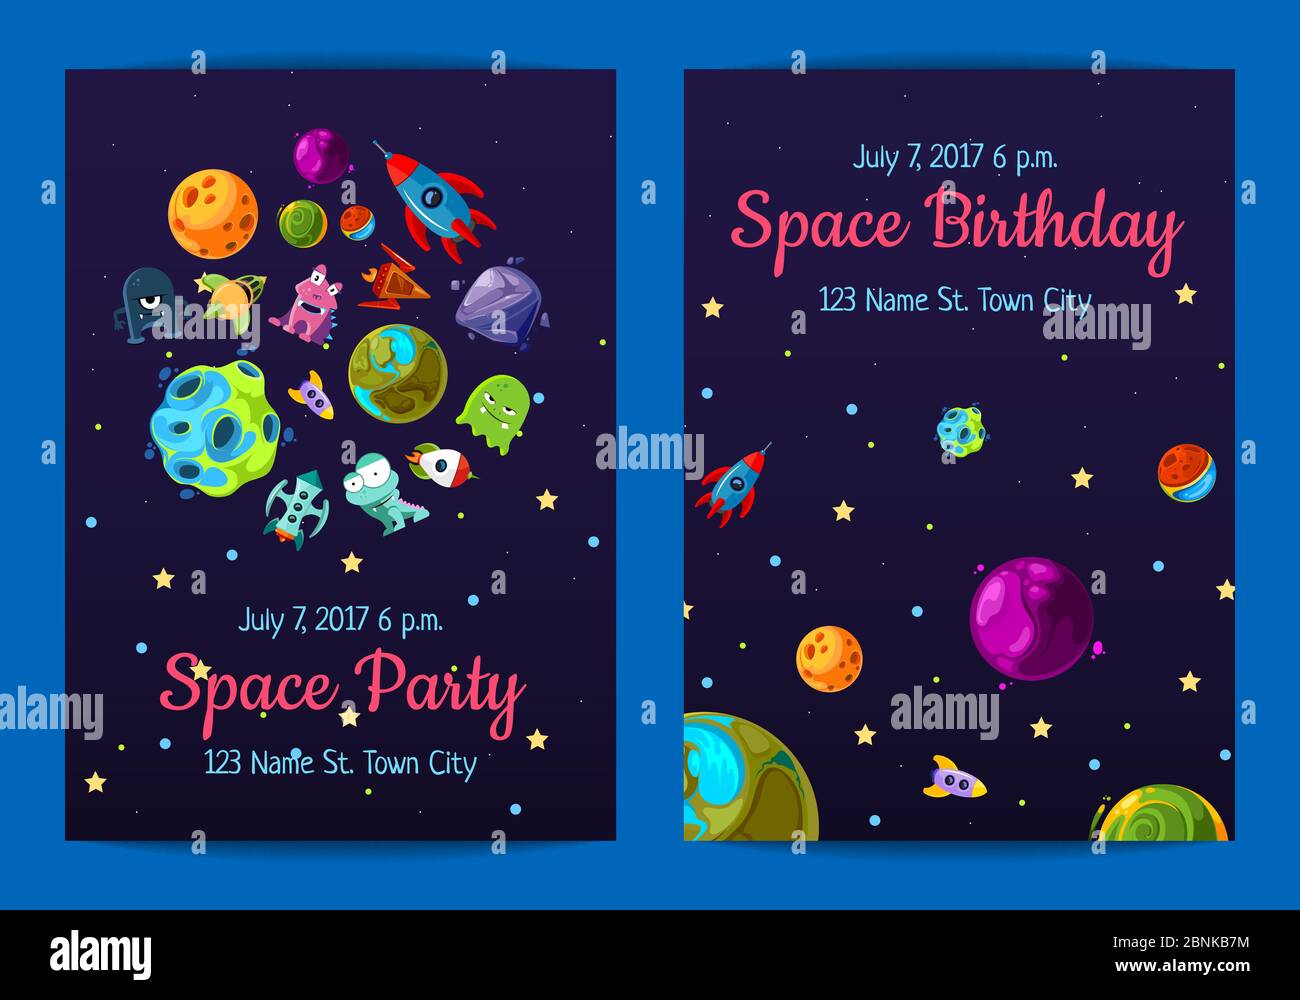 Vector space birthday party invitation templates with space elements, planets and ships Stock Vector